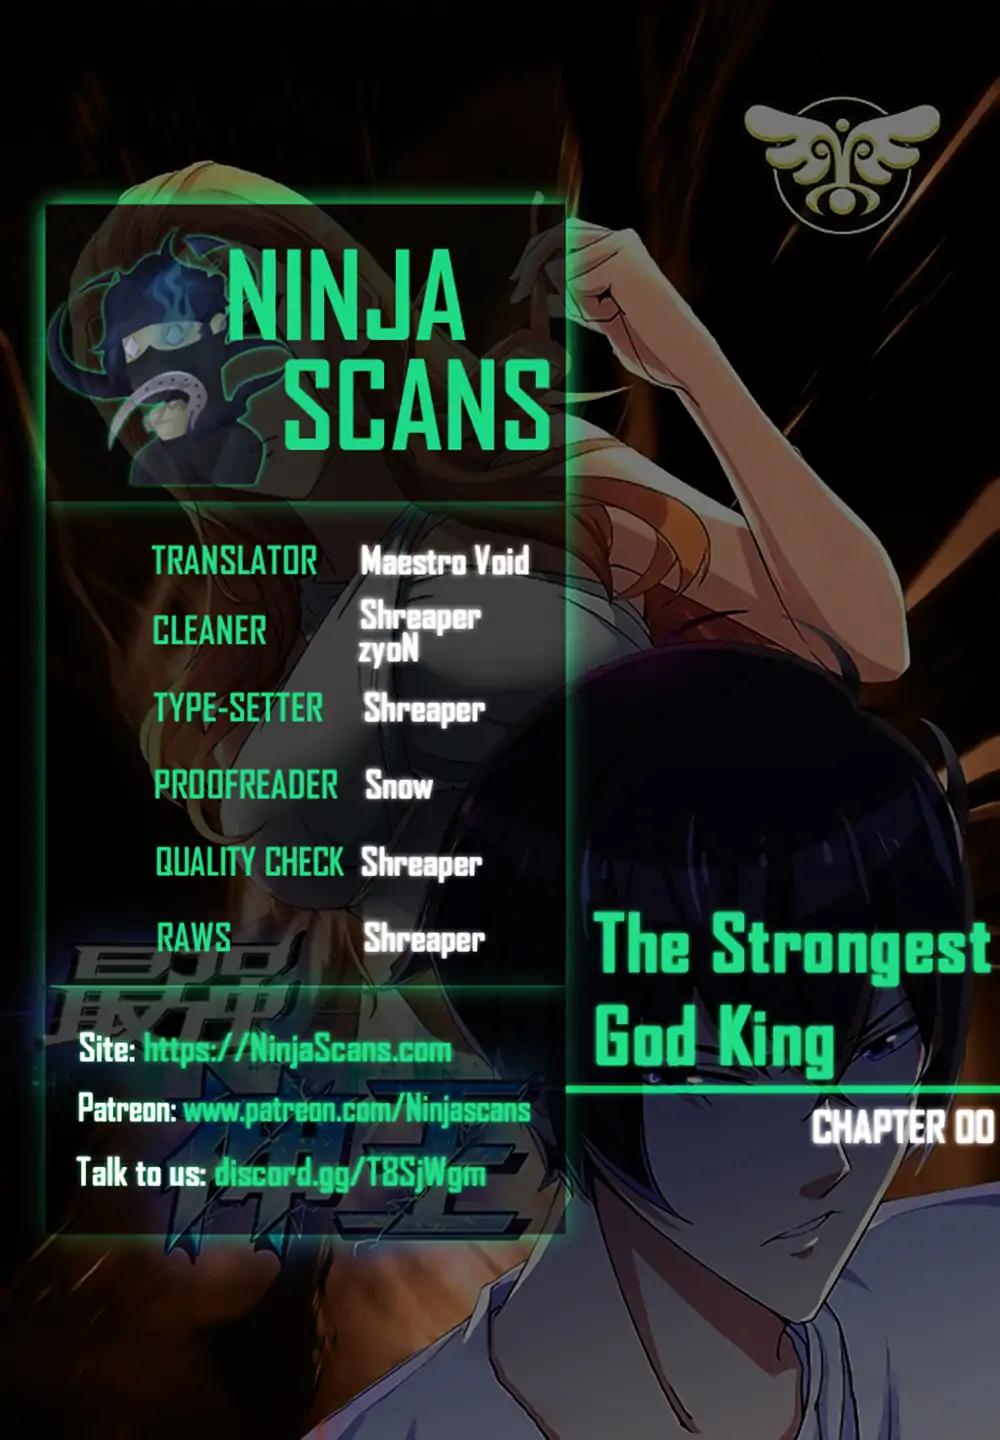 The Strongest God King Chapter 0: